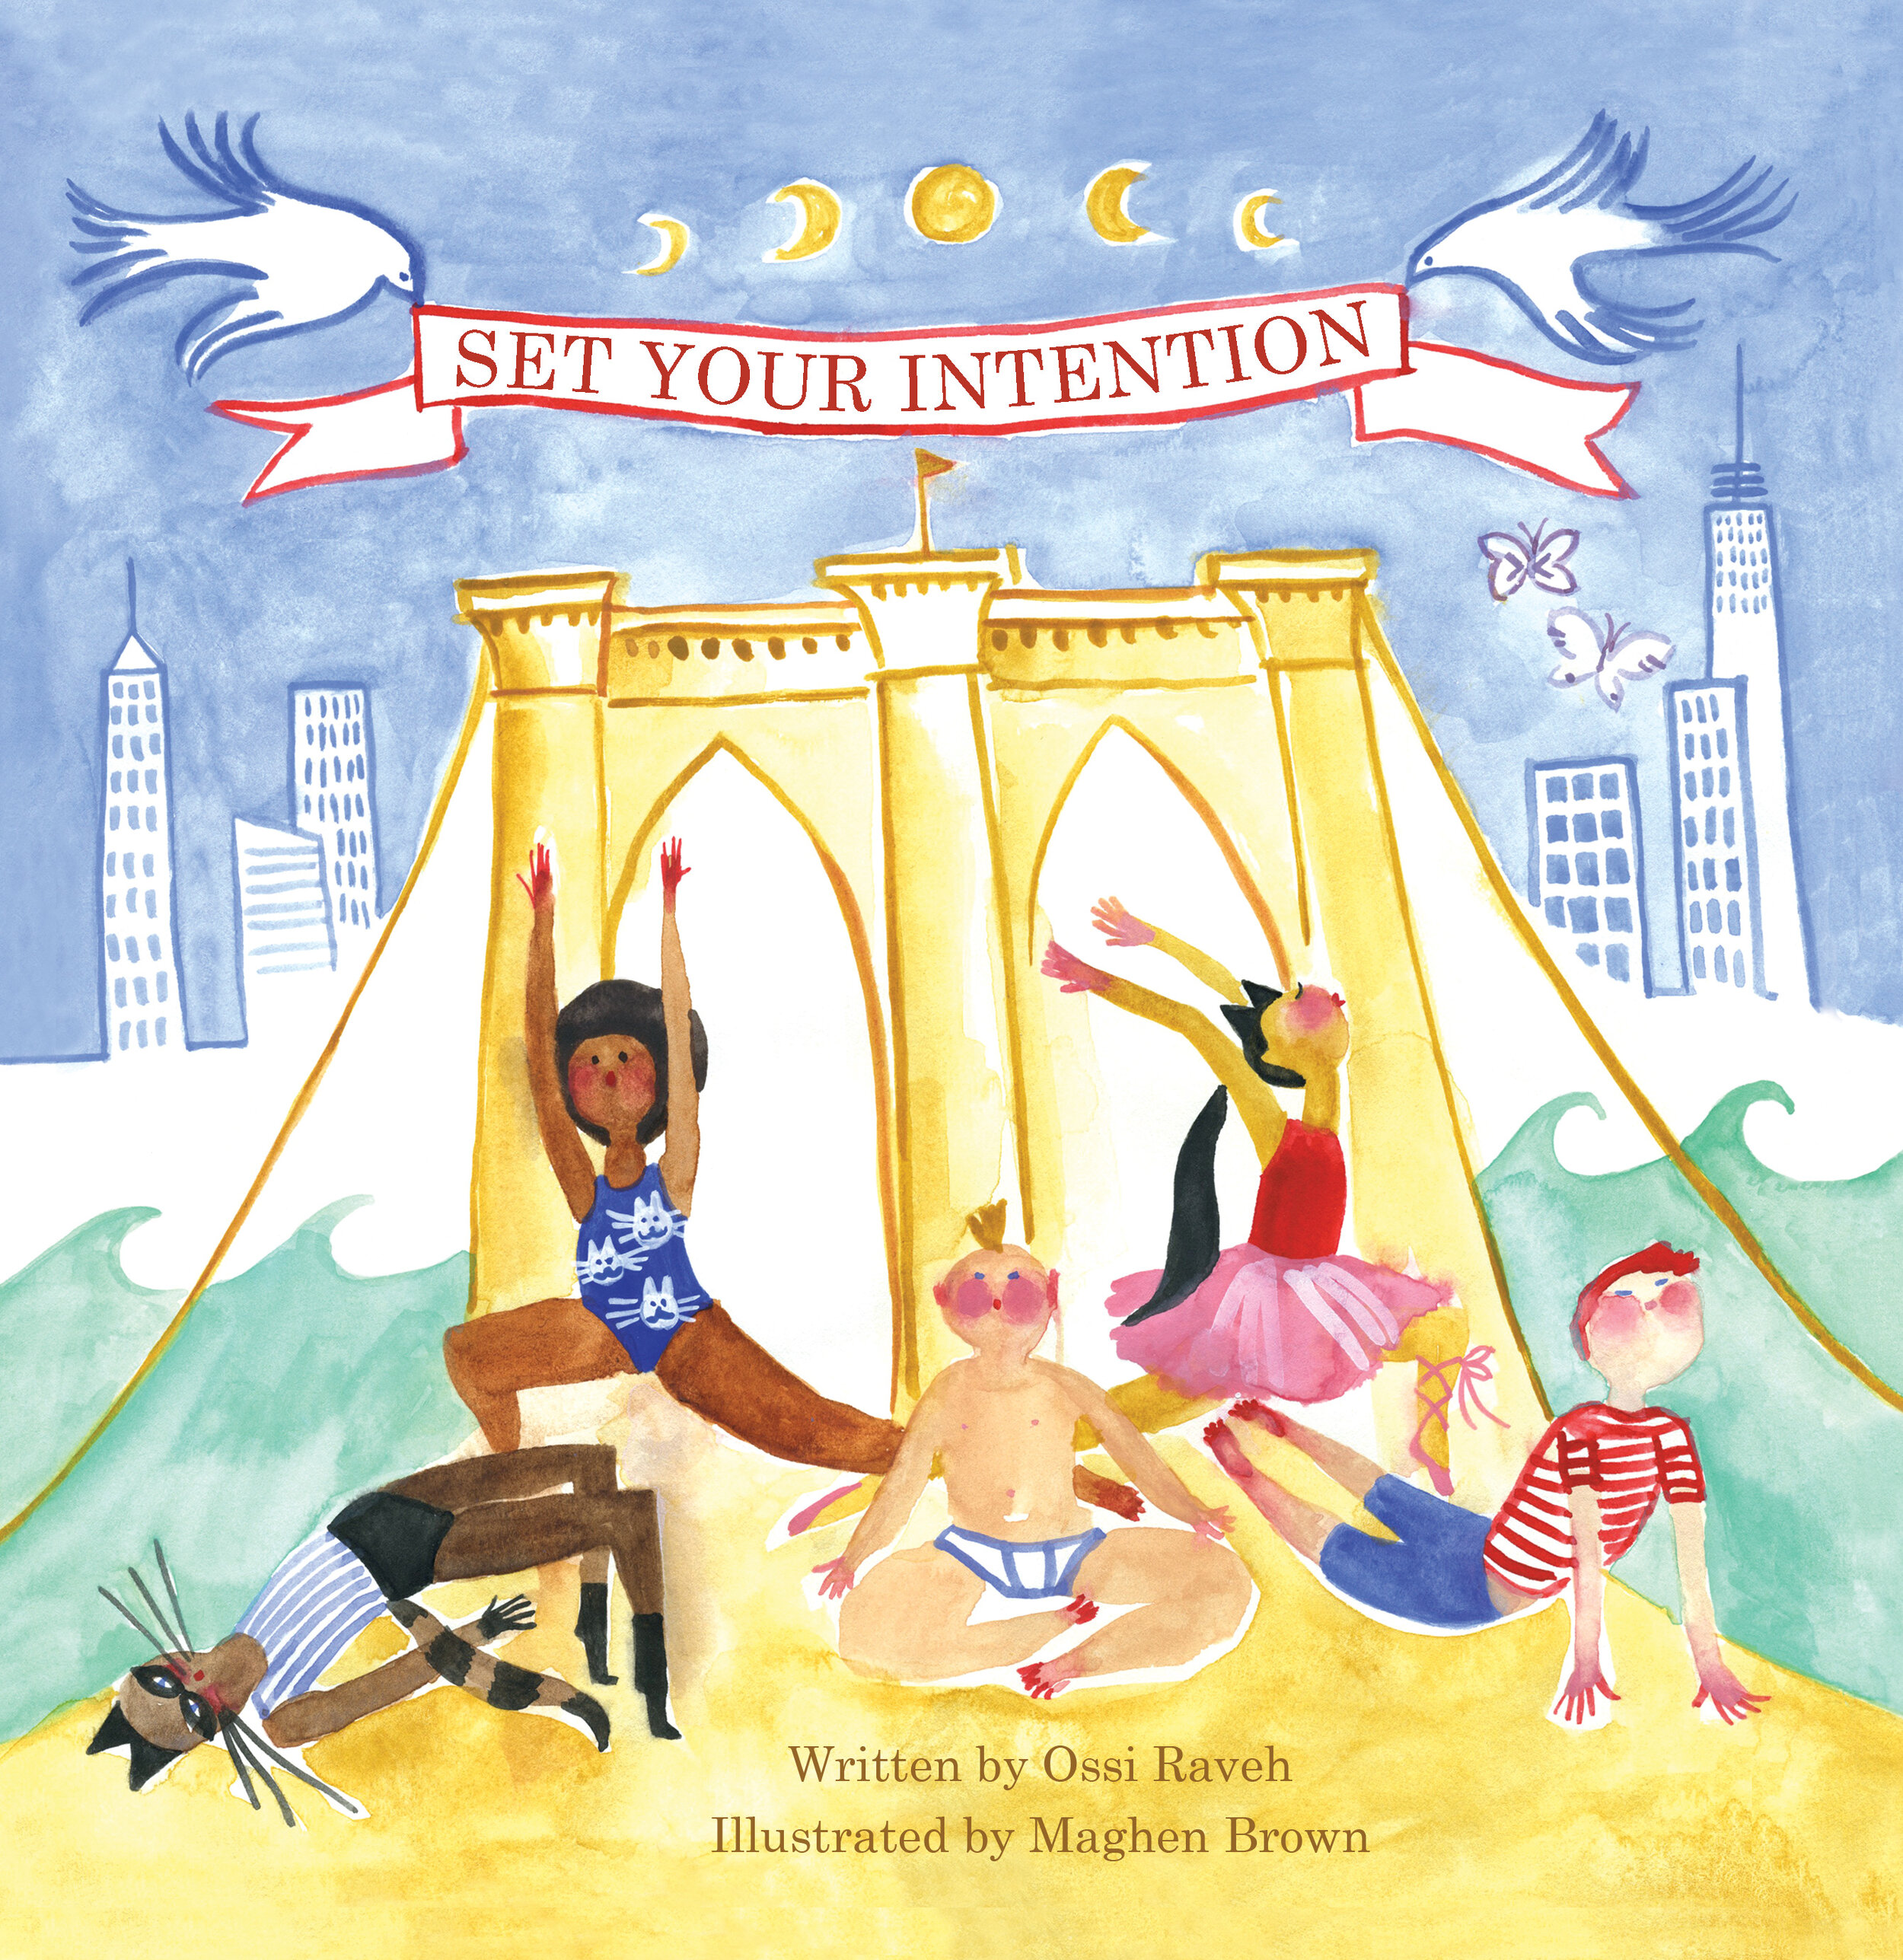 THE COVER OF THE CHILDREN'S BOOK SET YOUR INTENTION